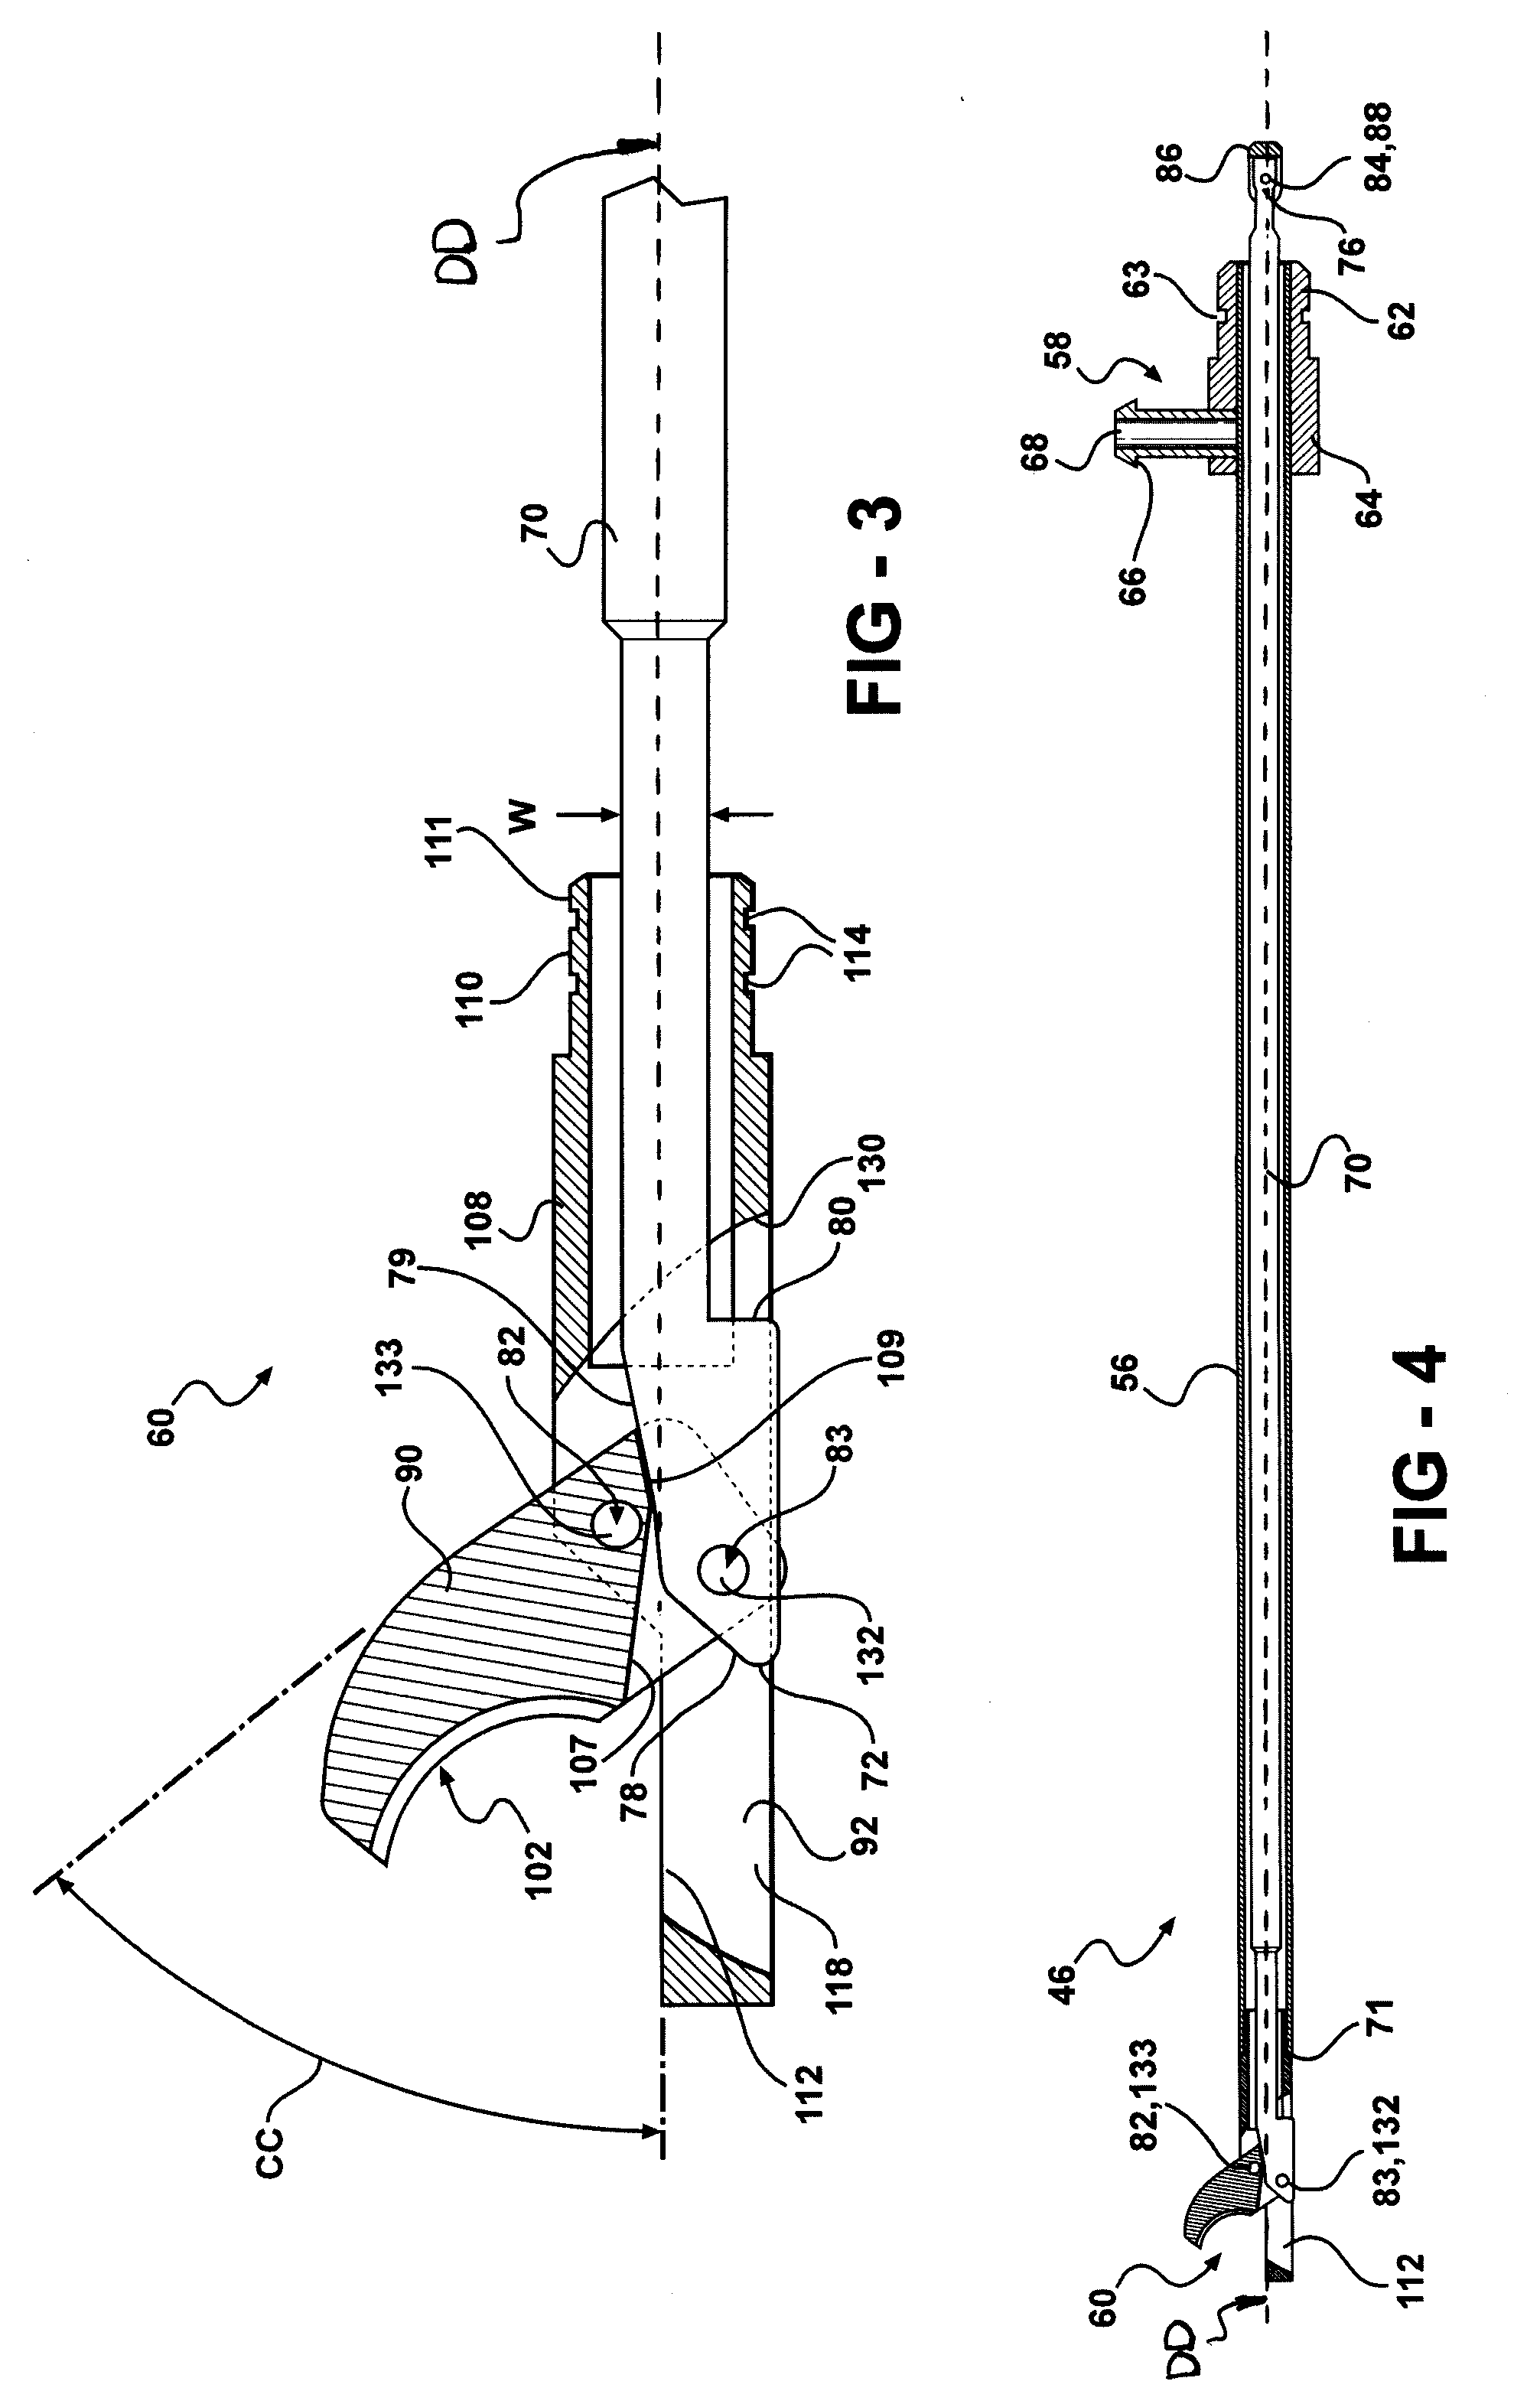 Forceps for performing endoscopic or arthroscopic surgery